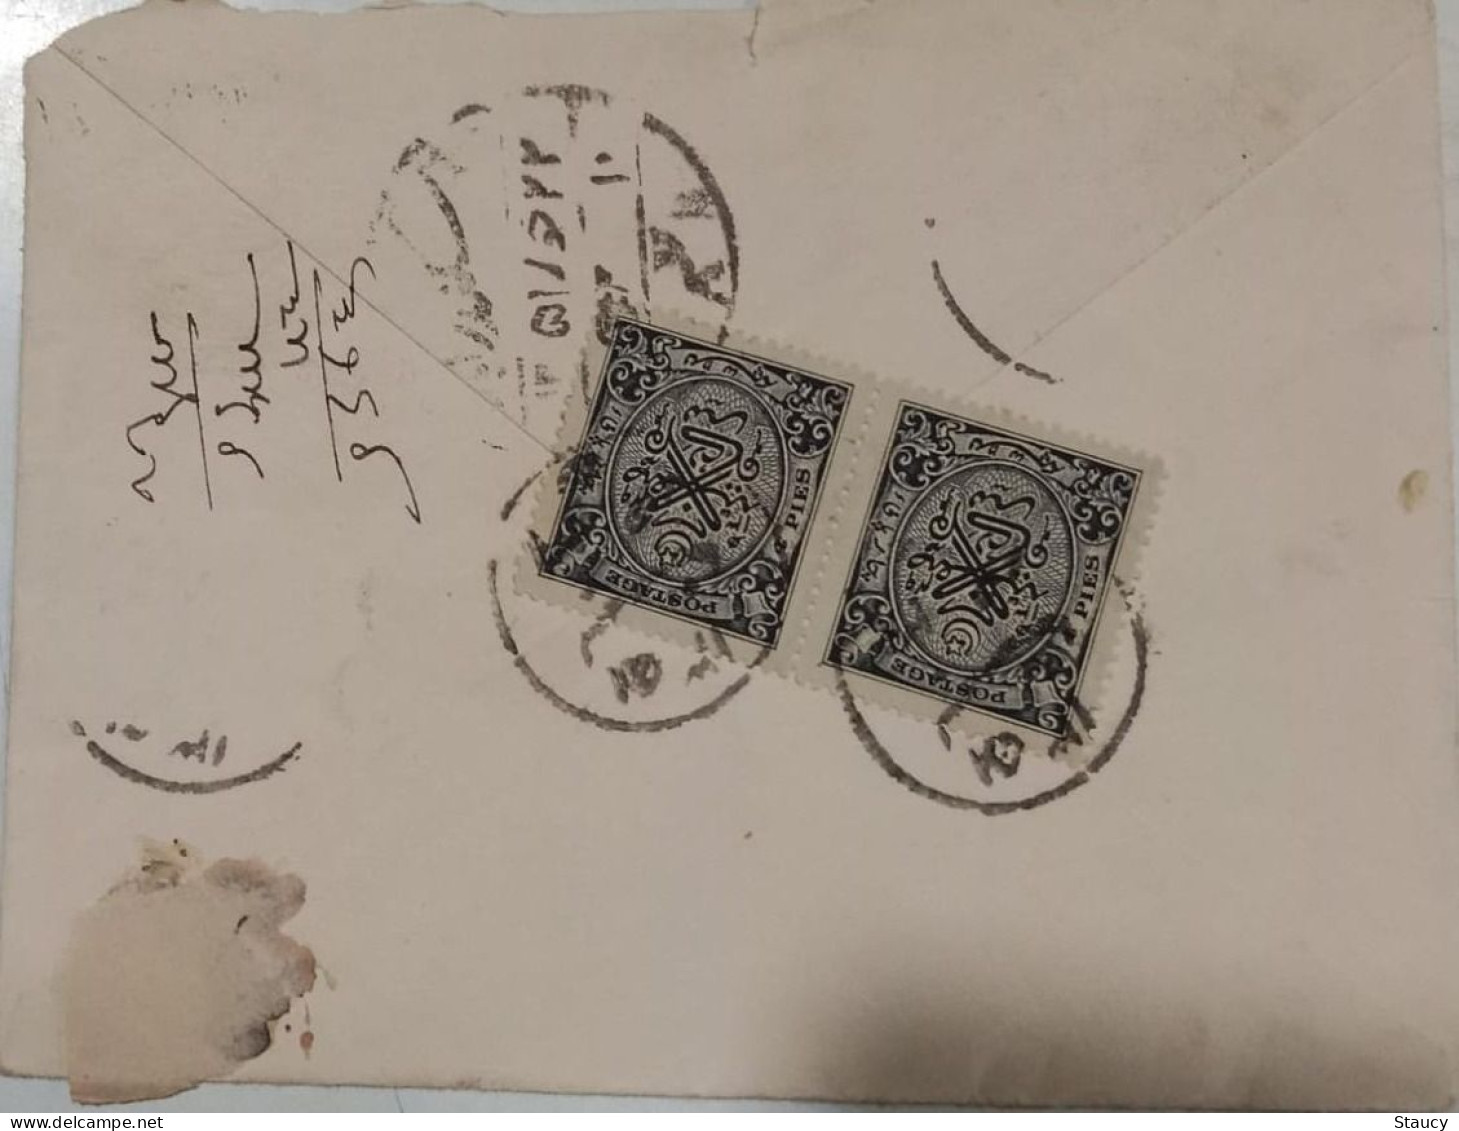 BRITISH INDIA HYDERABAD STATE 2 X 4p FRANKING On 8p Hyderabad Stationery COVER, NICE CANC ON FRONT & BACK As Per Scan - Hyderabad